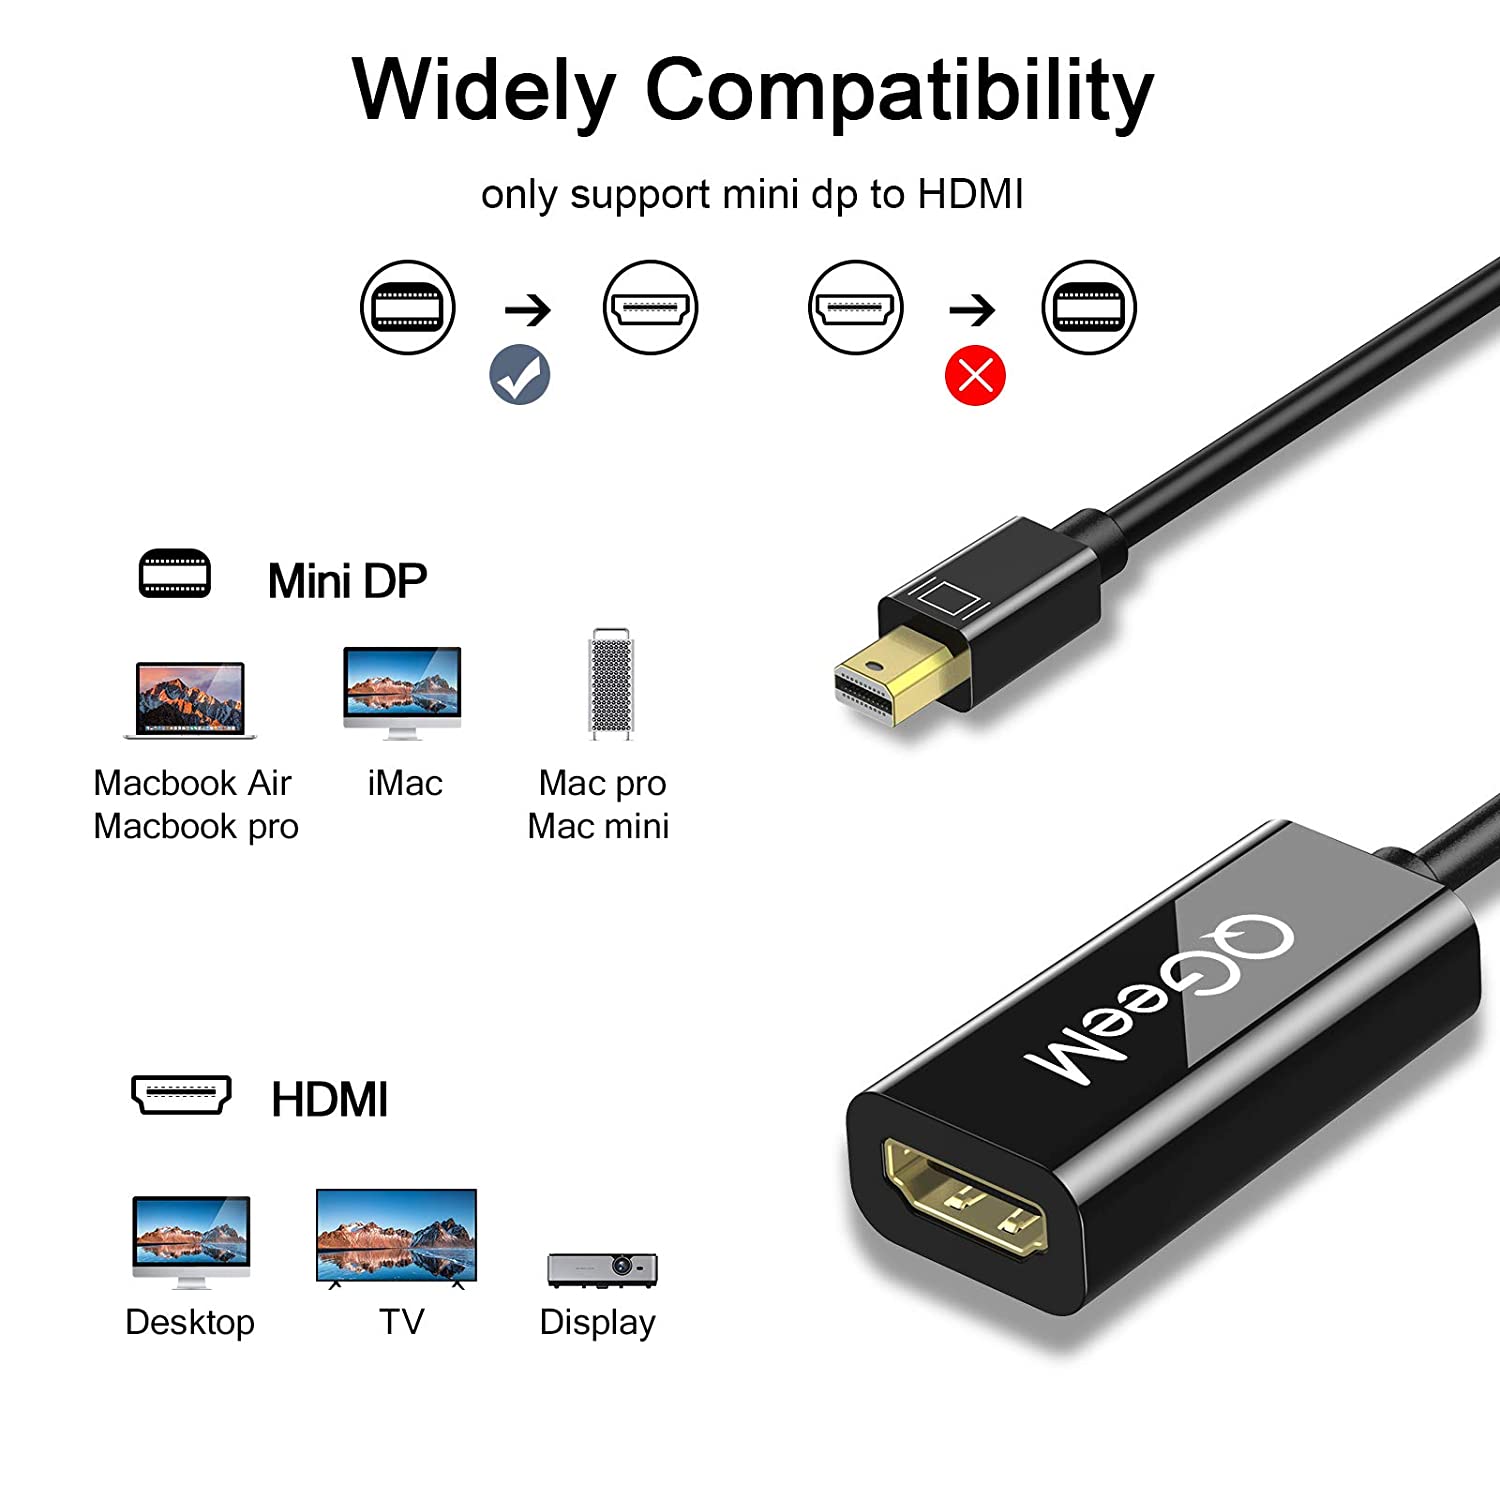 QGeeM Mini Displayport to HD MI Adapter Mini DP to HD-MI Adapter 1080P@60Hz with Gold Plated Compatible with MacBook Pro